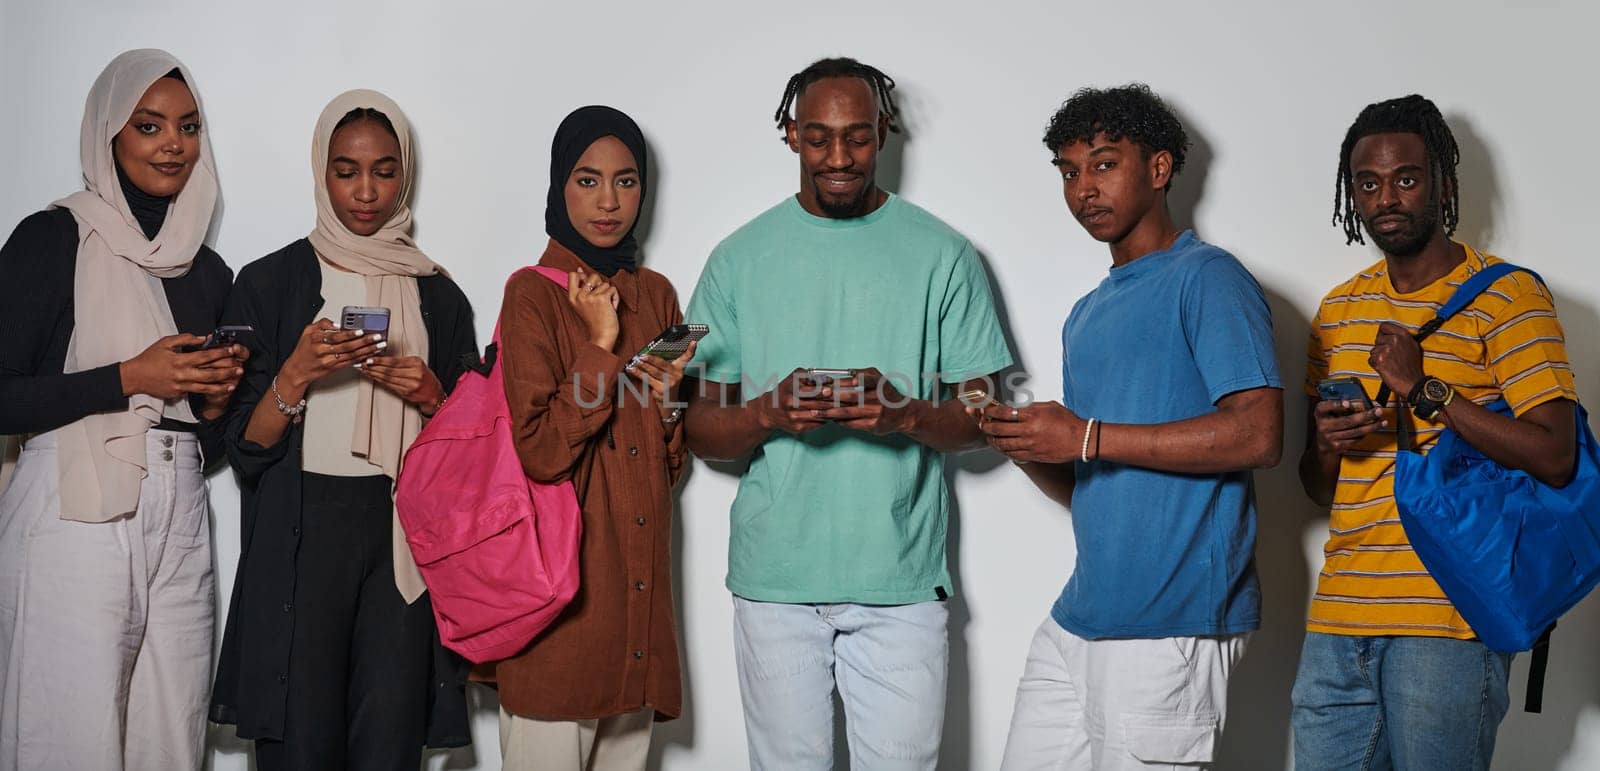 A diverse group of students, immersed in the digital age, stands united while engaging with their smartphones against a white backdrop, symbolizing the modern era of connectivity, communication, and collaborative learning by dotshock